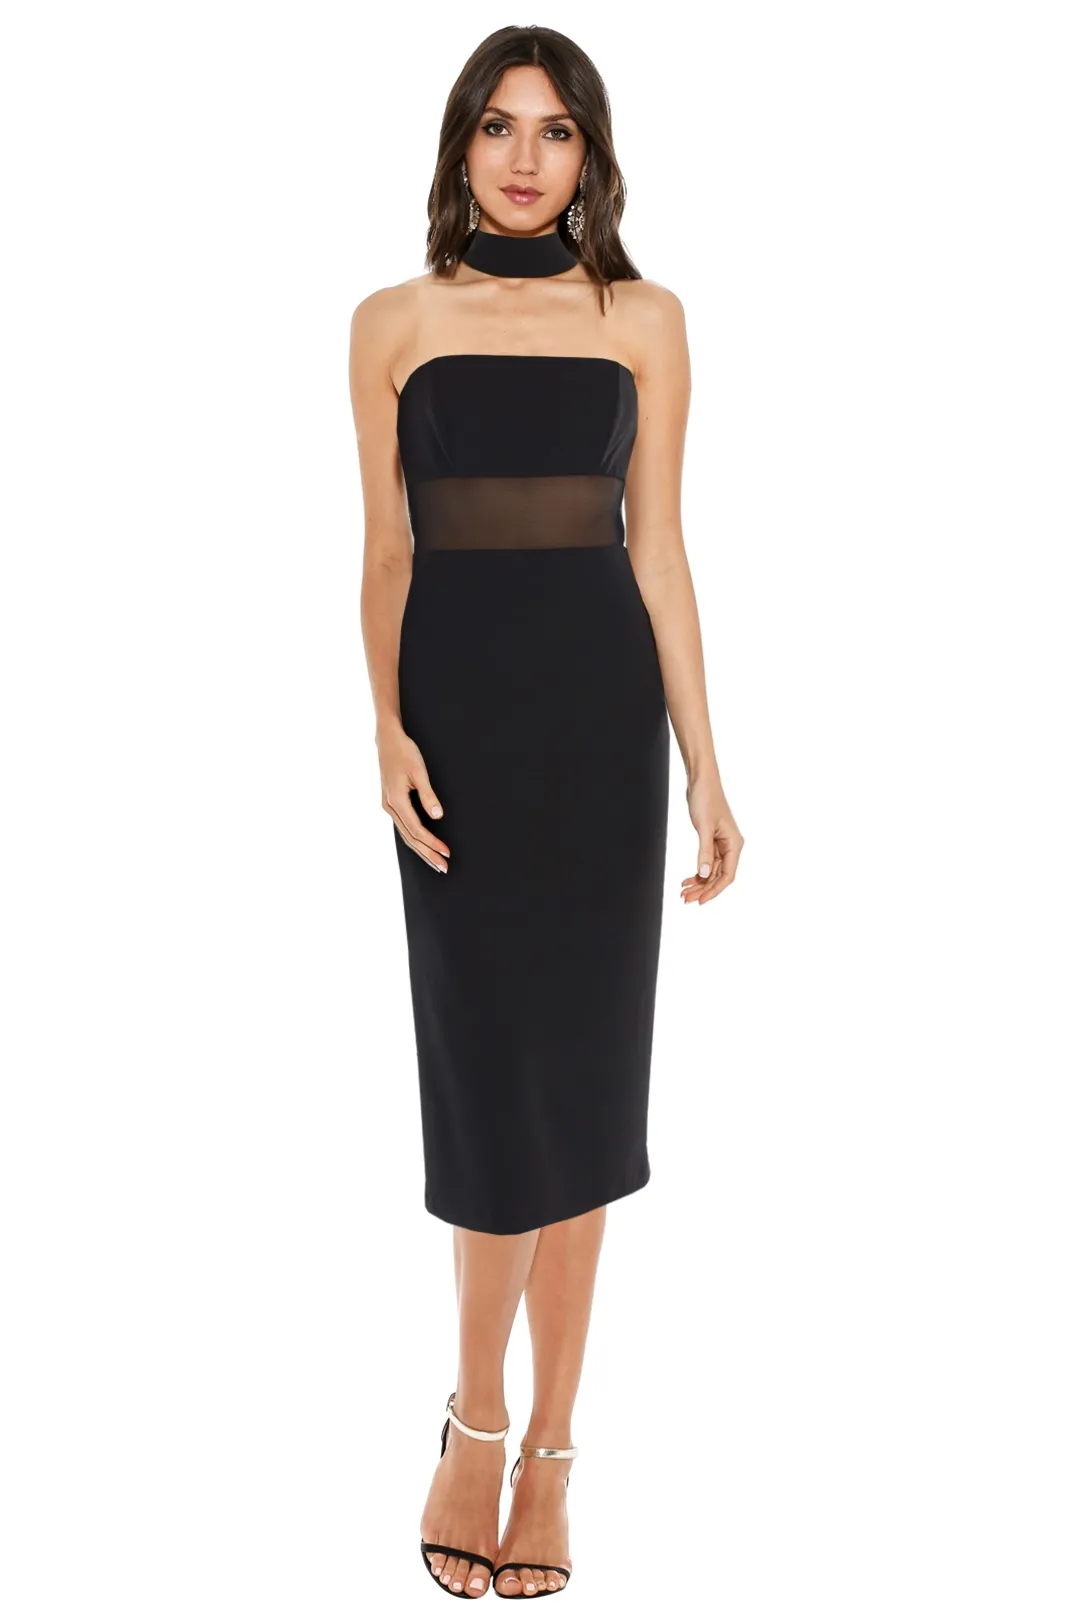 Olivia Cocktail Dress by ABS by Allen Schwartz for party events